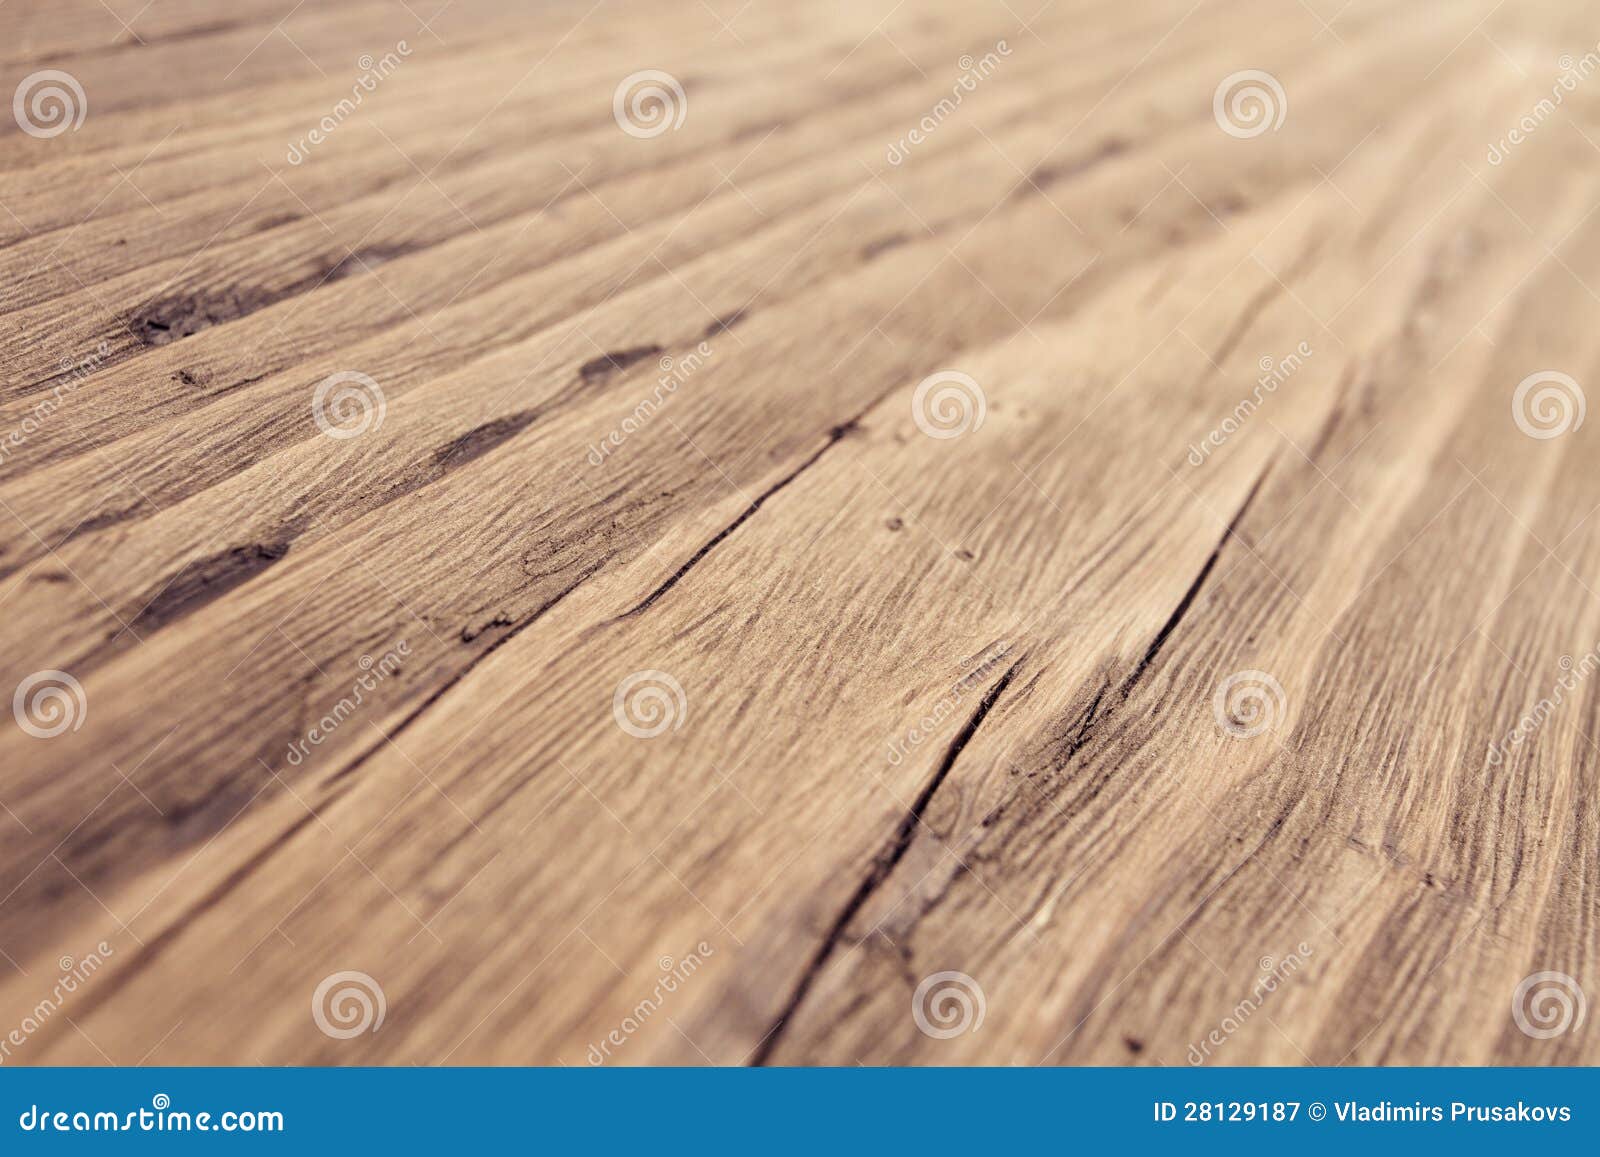 wood texture, wooden grain background, desk in perspective close up, striped timber